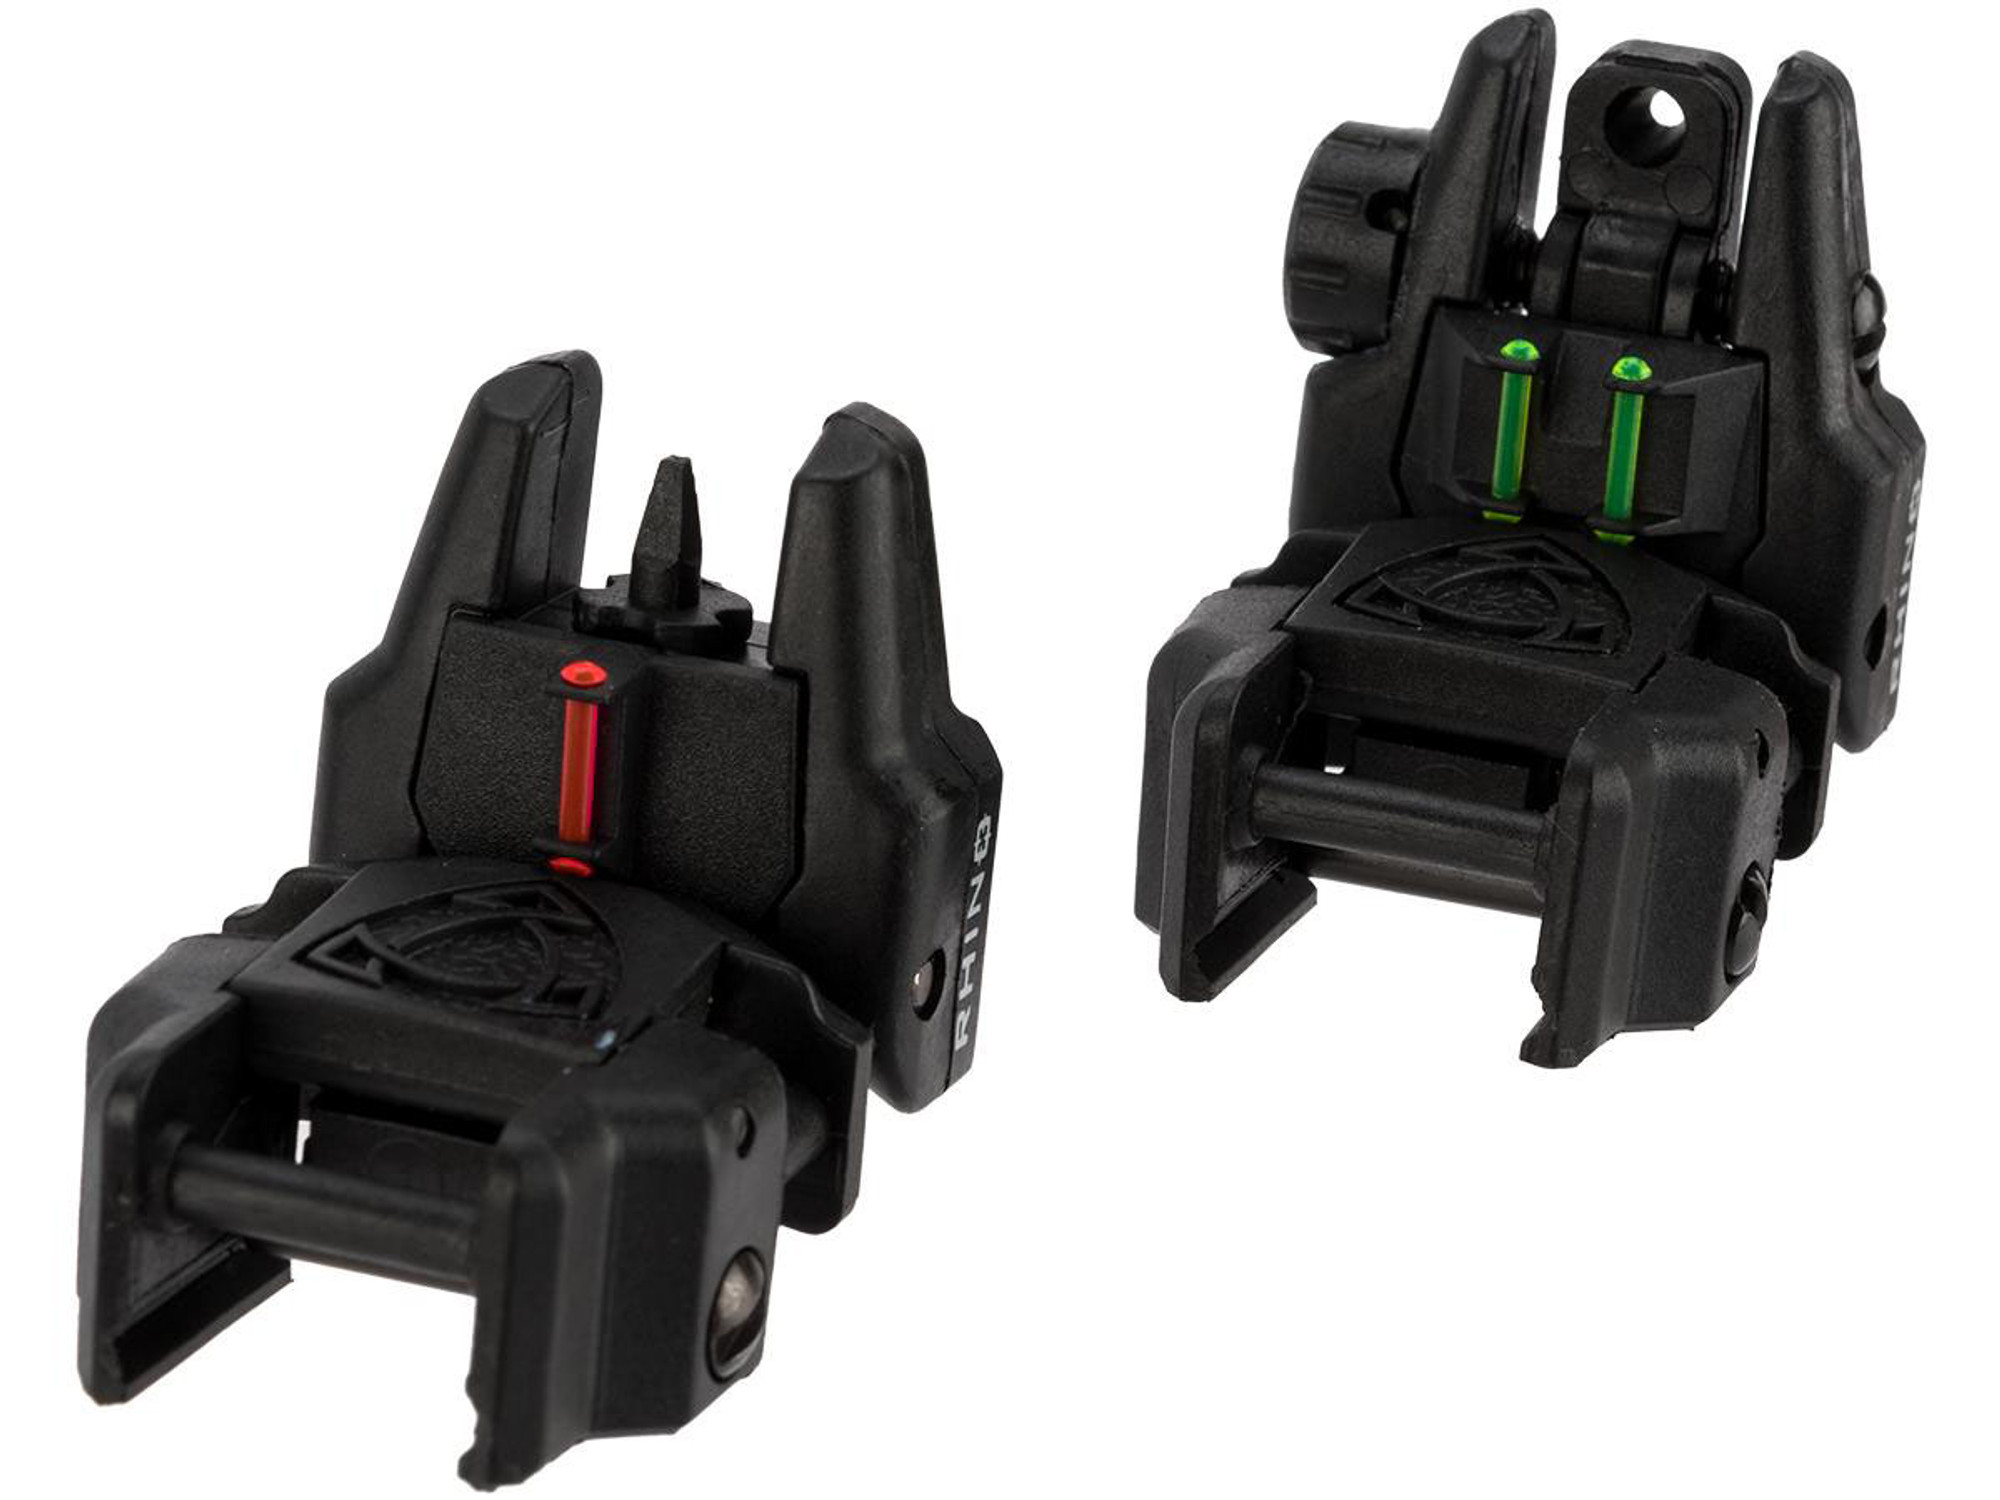 APS Gen 2 Rhino Flip-up Sight Package with Fiber Optic Inserts (Color: Black)